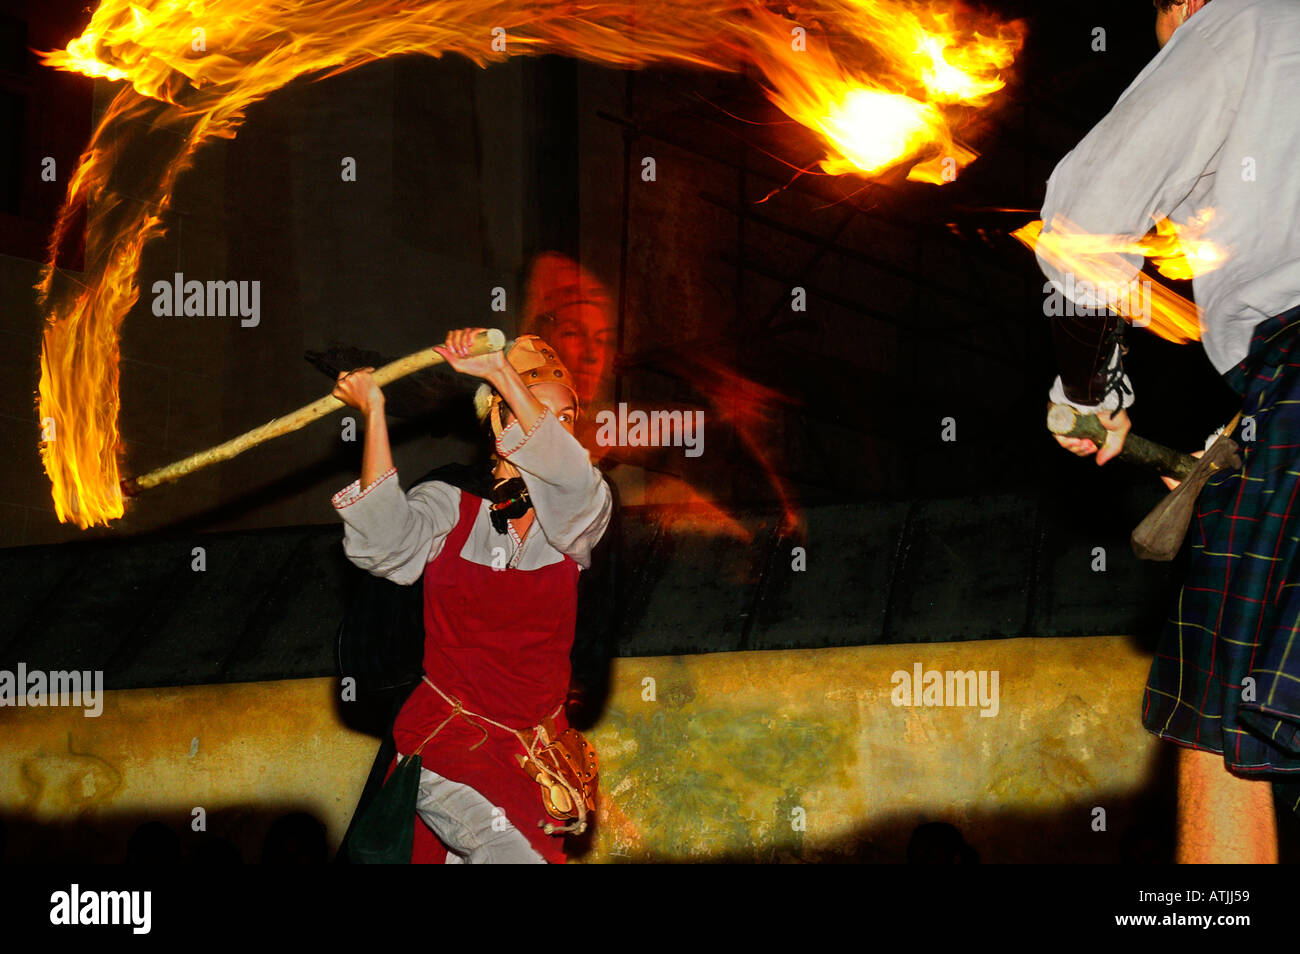 Clashes with blazing facules, fighting with flames, night medieval wrestling performance Stock Photo